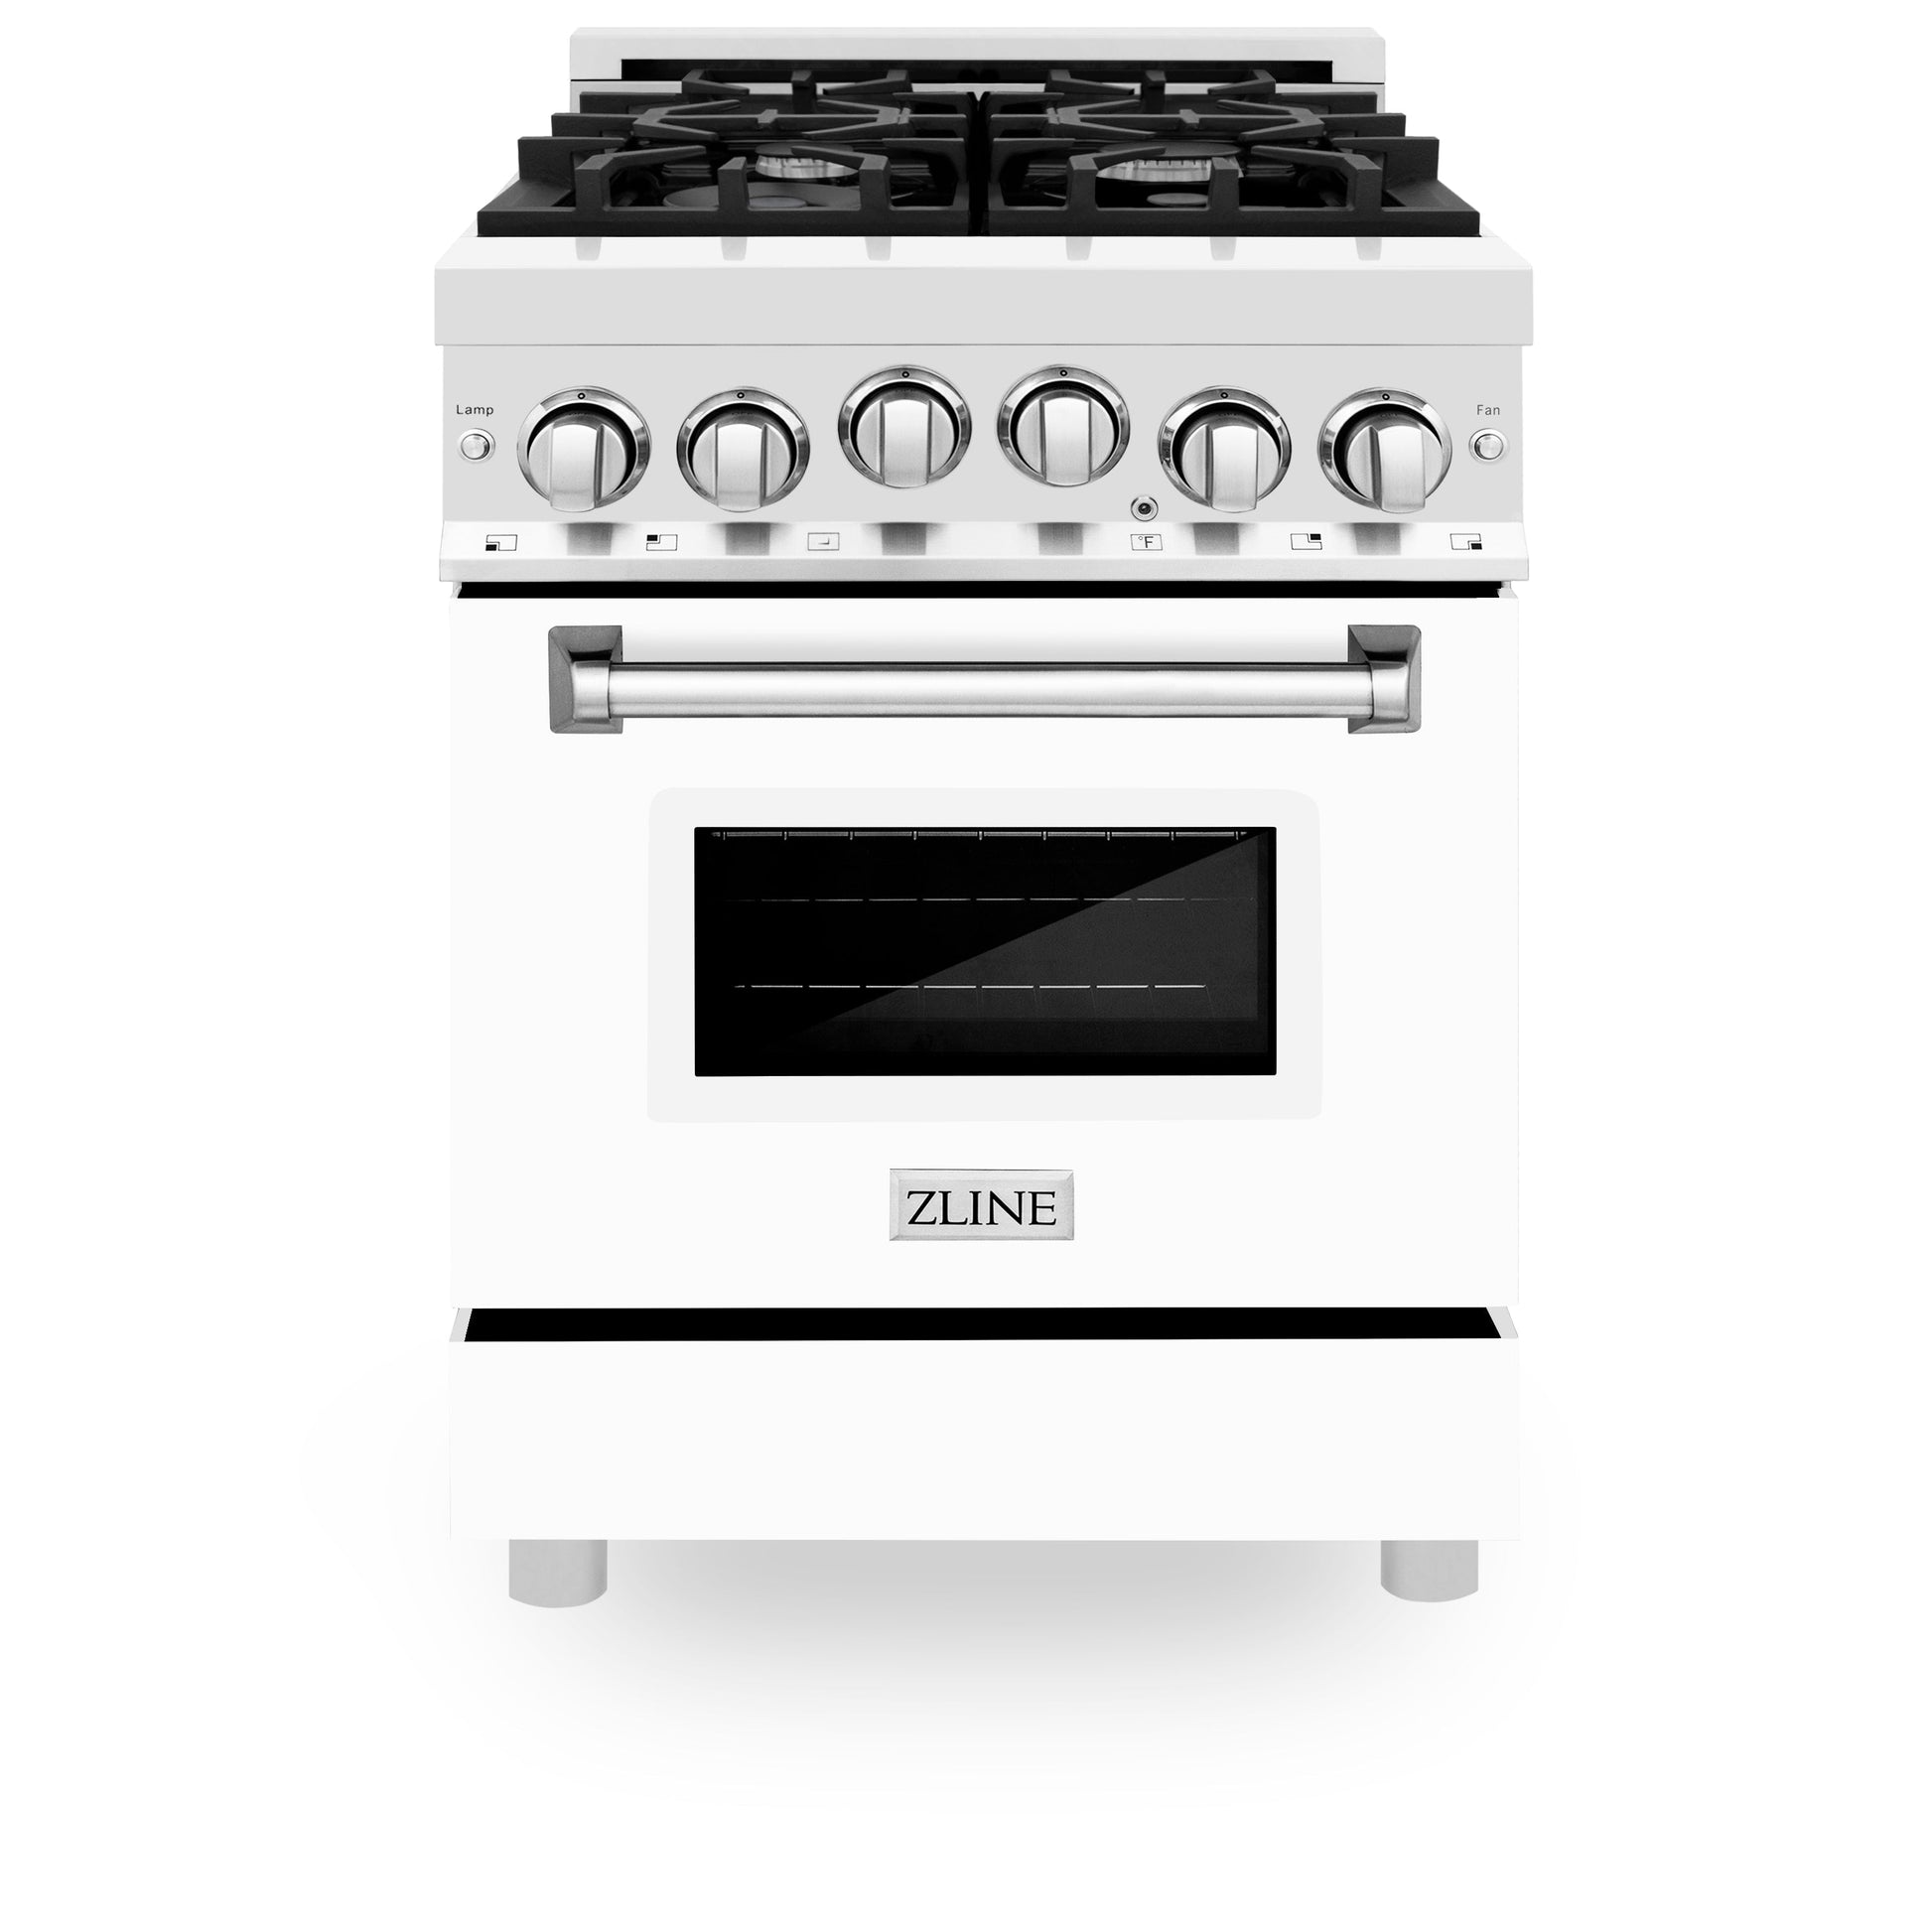 ZLINE 24" Gas Oven and Cooktop Range with Griddle - Stainless Steel with Matte White Door